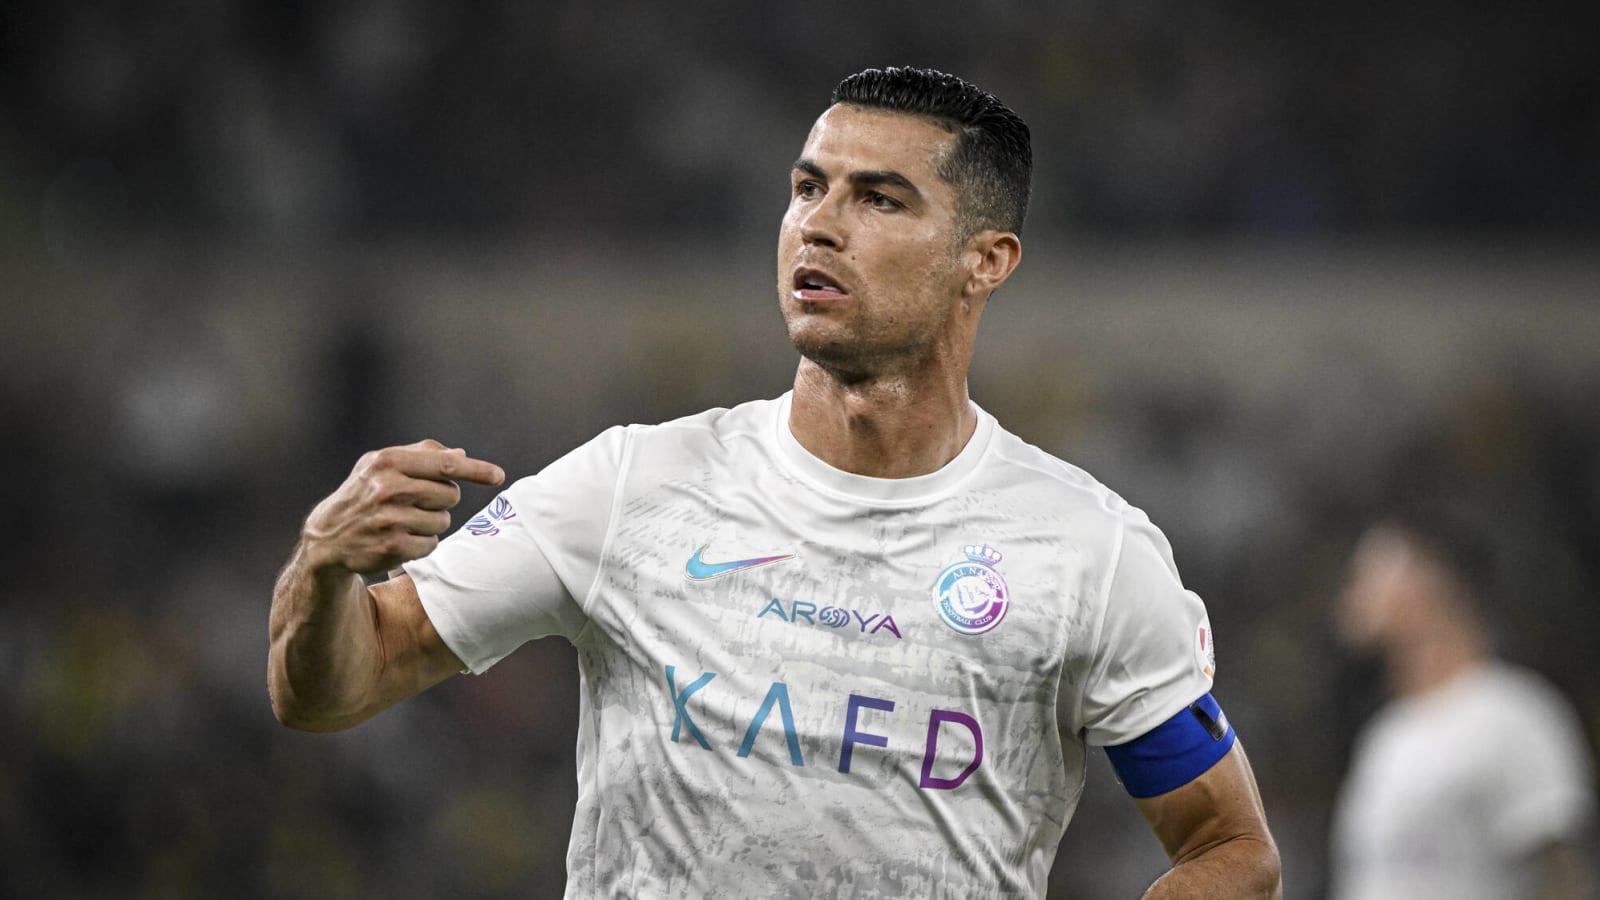 Why Cristiano Ronaldo Was Benched in the 2022 World Cup?